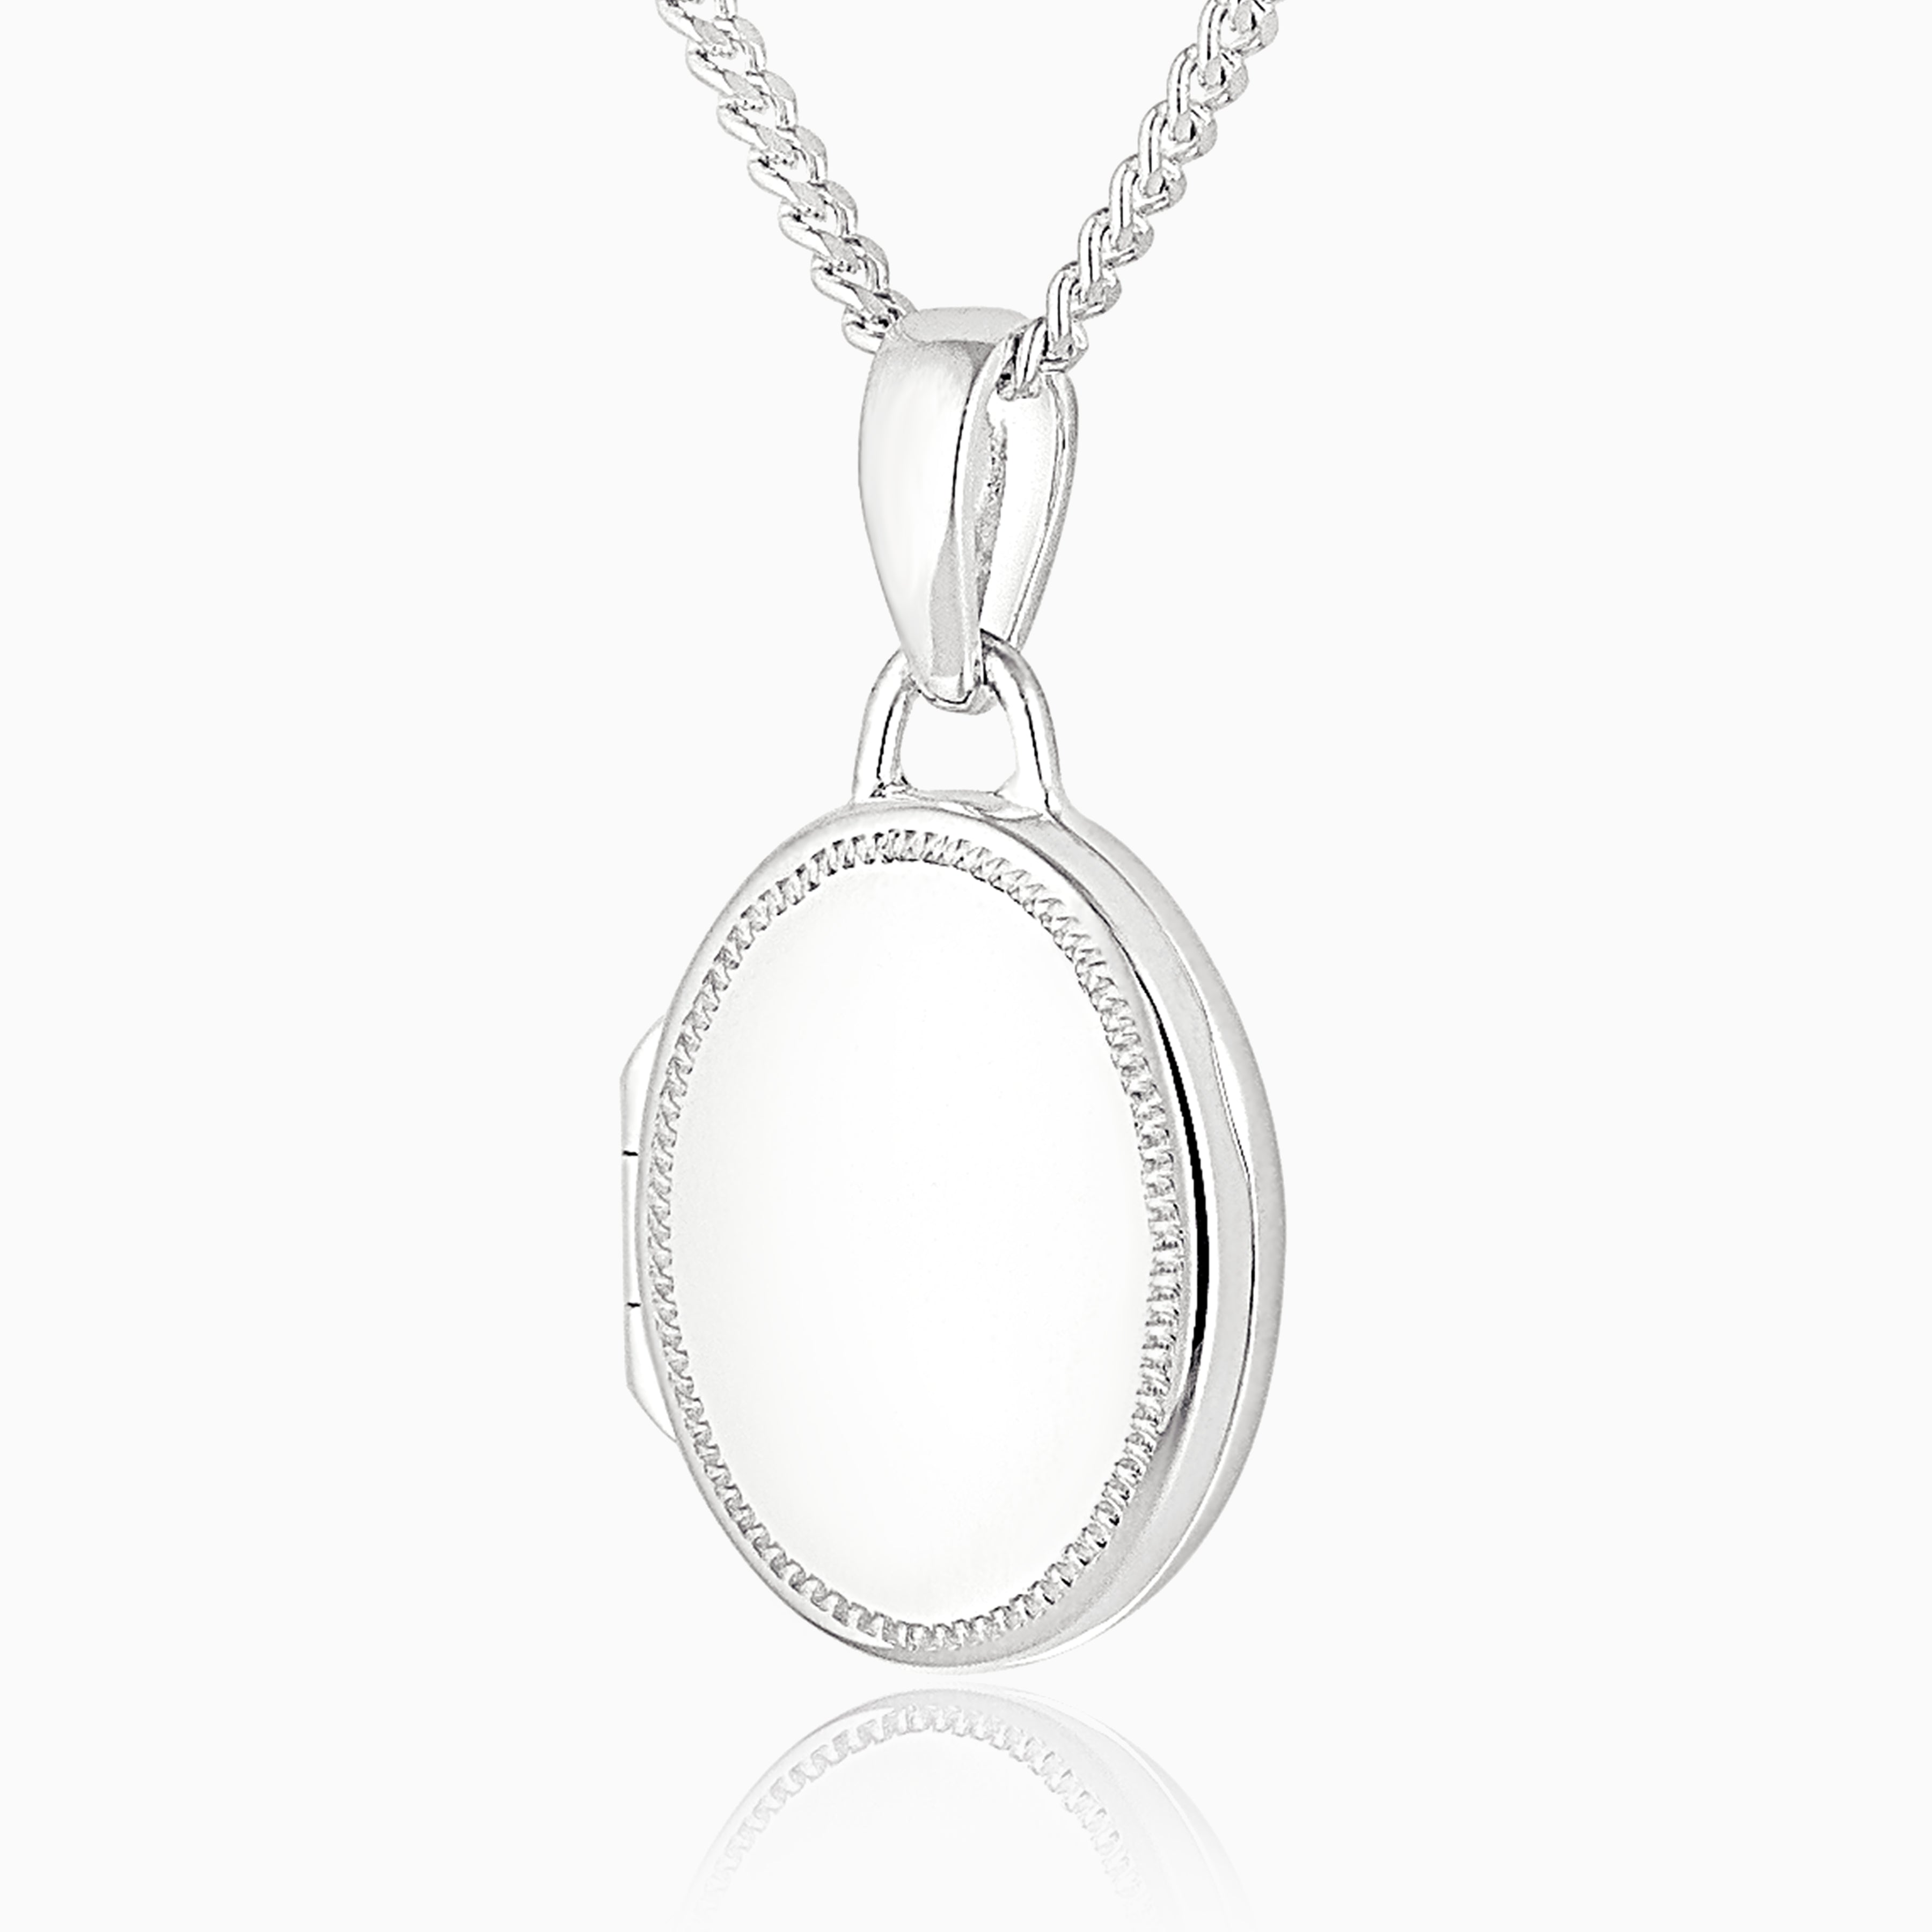 sterling silver oval locket with a riddle-edged engraved border, on sterling silver rope chain